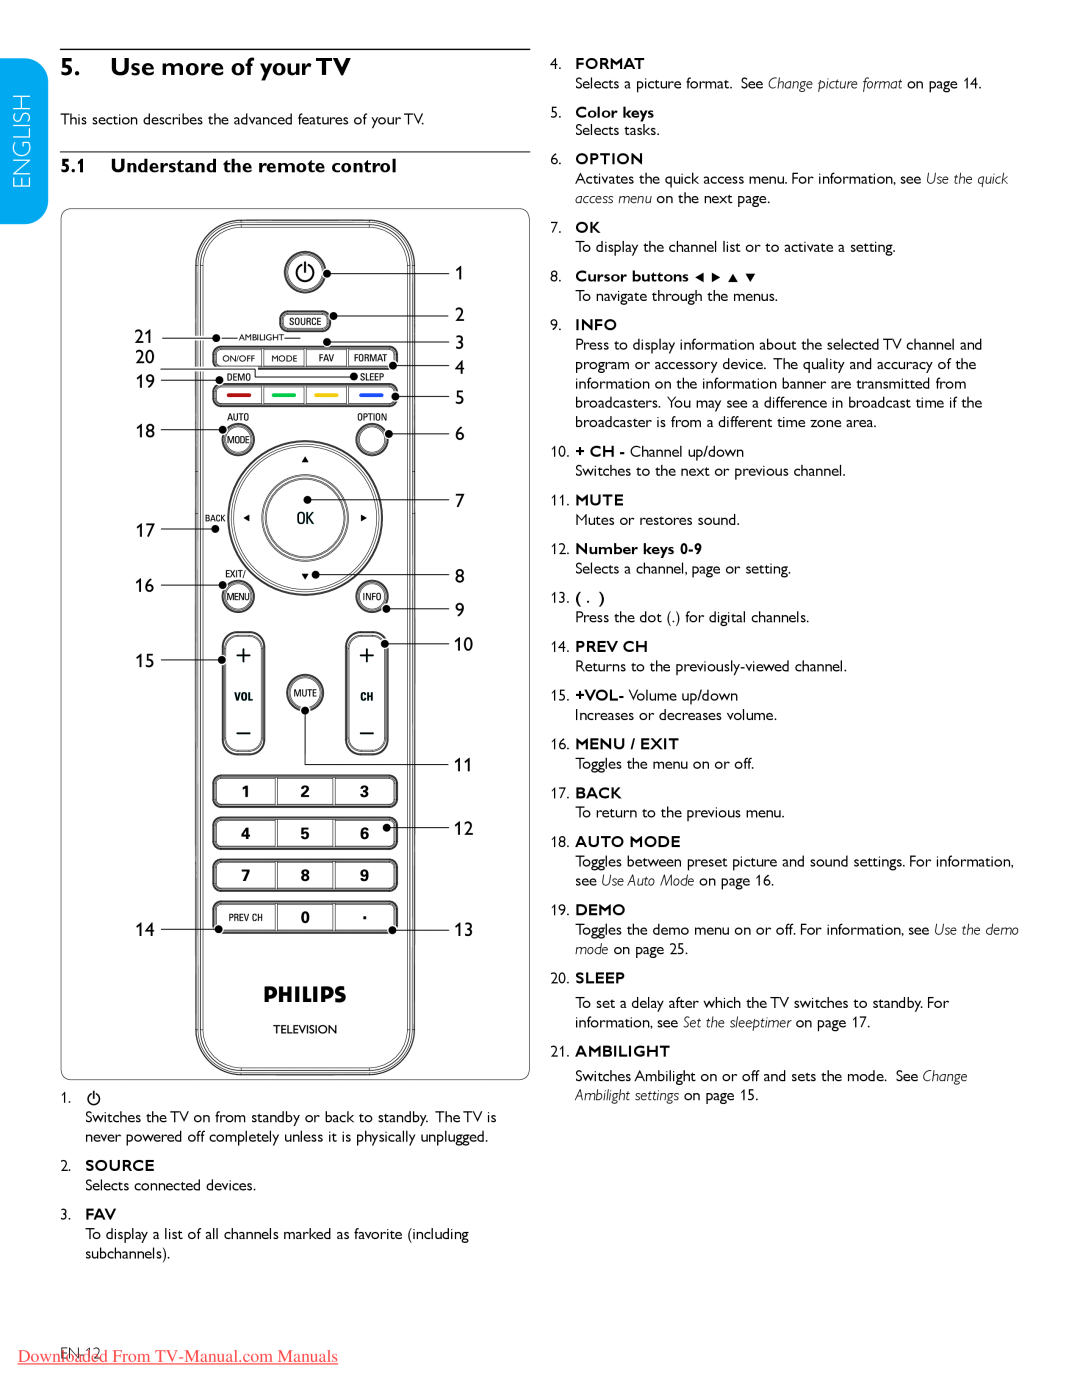 Philips 42PFL7603D Use more of your TV, Understand the remote control, Française, Downloaded From TV-Manual.com Manuals 